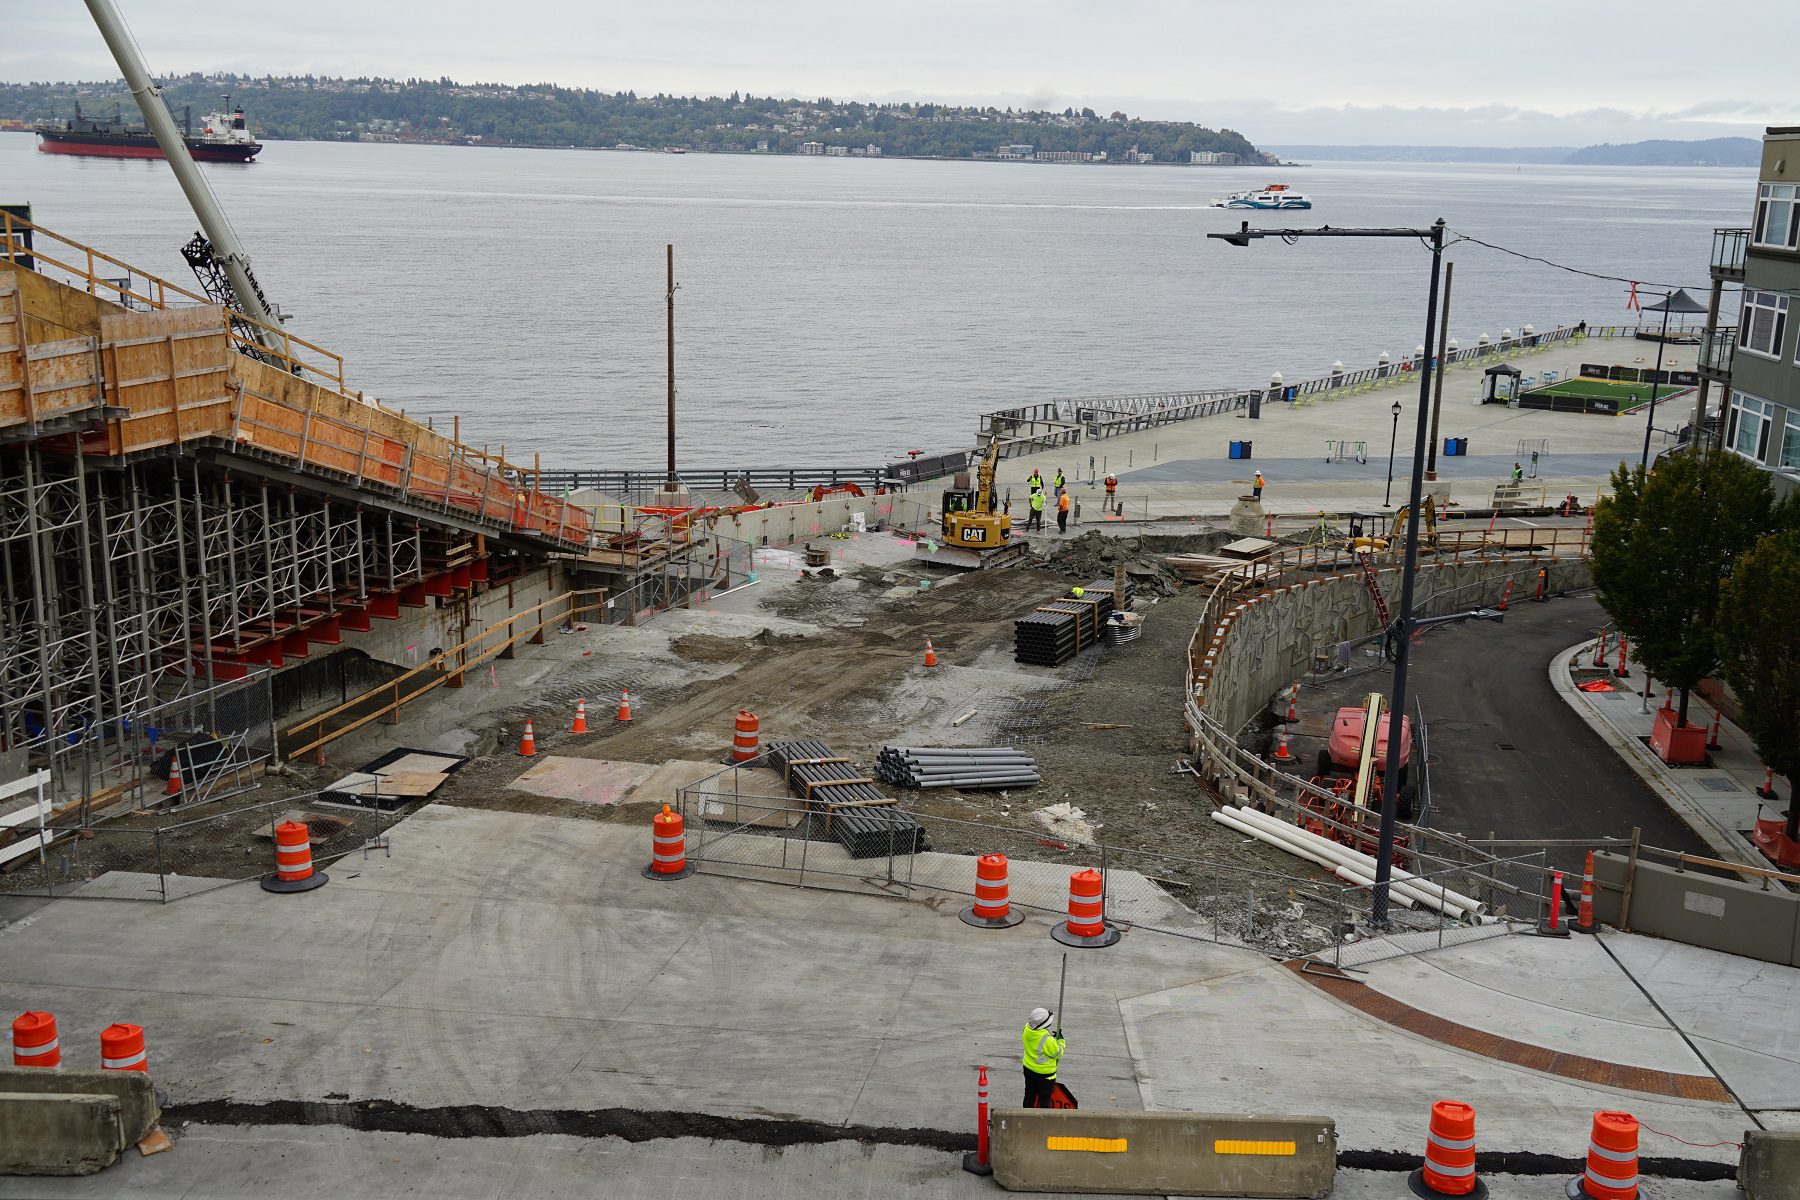 View looking down a construction site toward a large body of water on a cloudy day. Several large orange barrels and construction workers are visible.